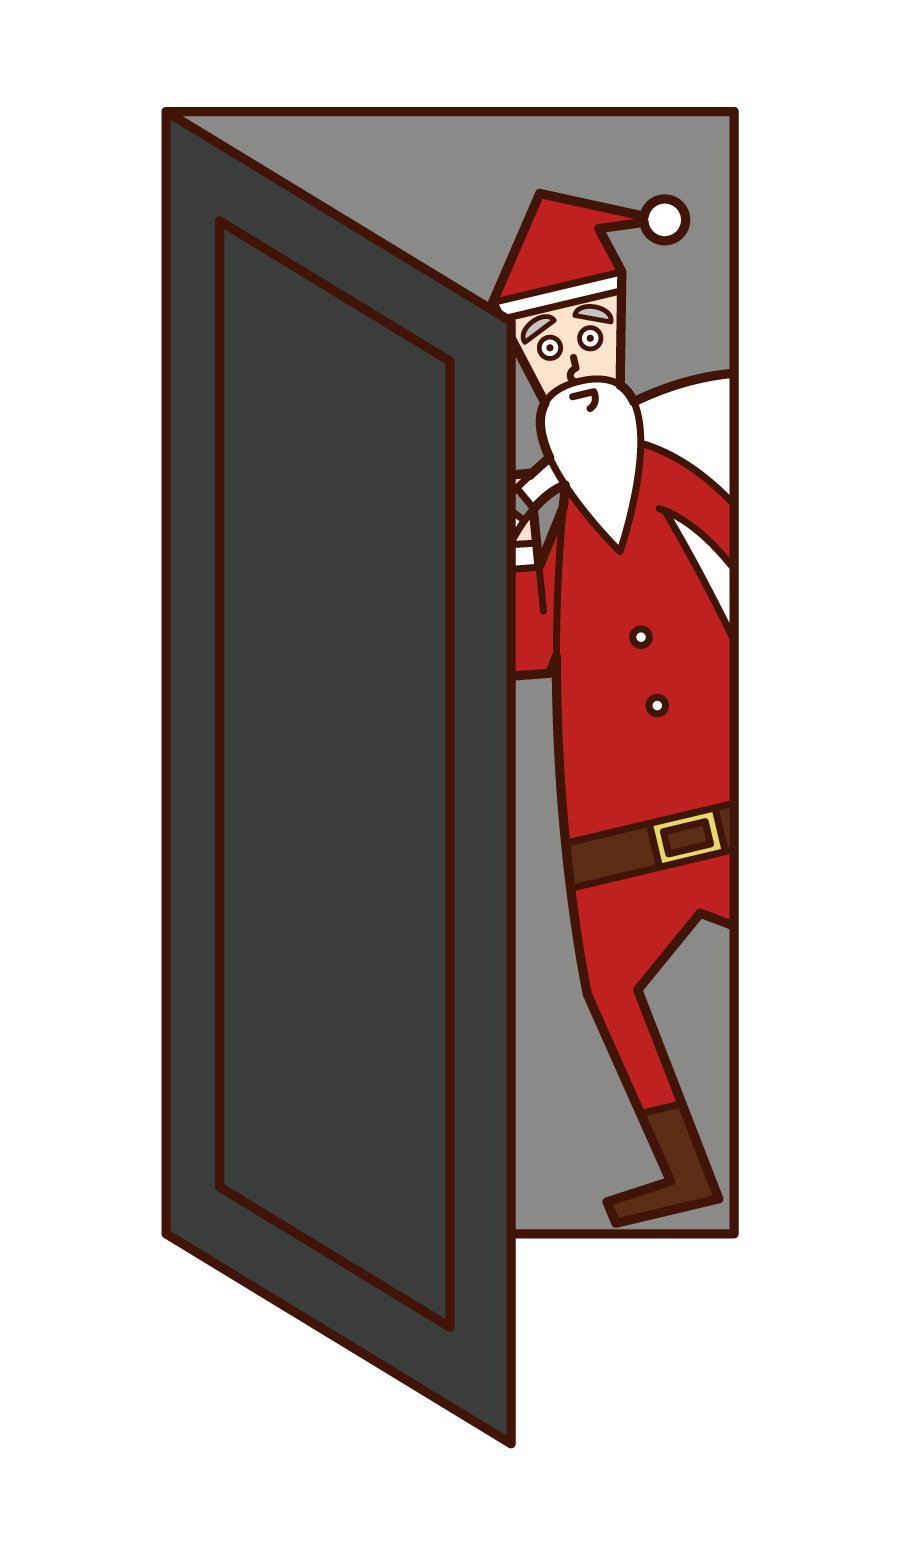 Illustration of Santa Claus (man) sneaking into the room